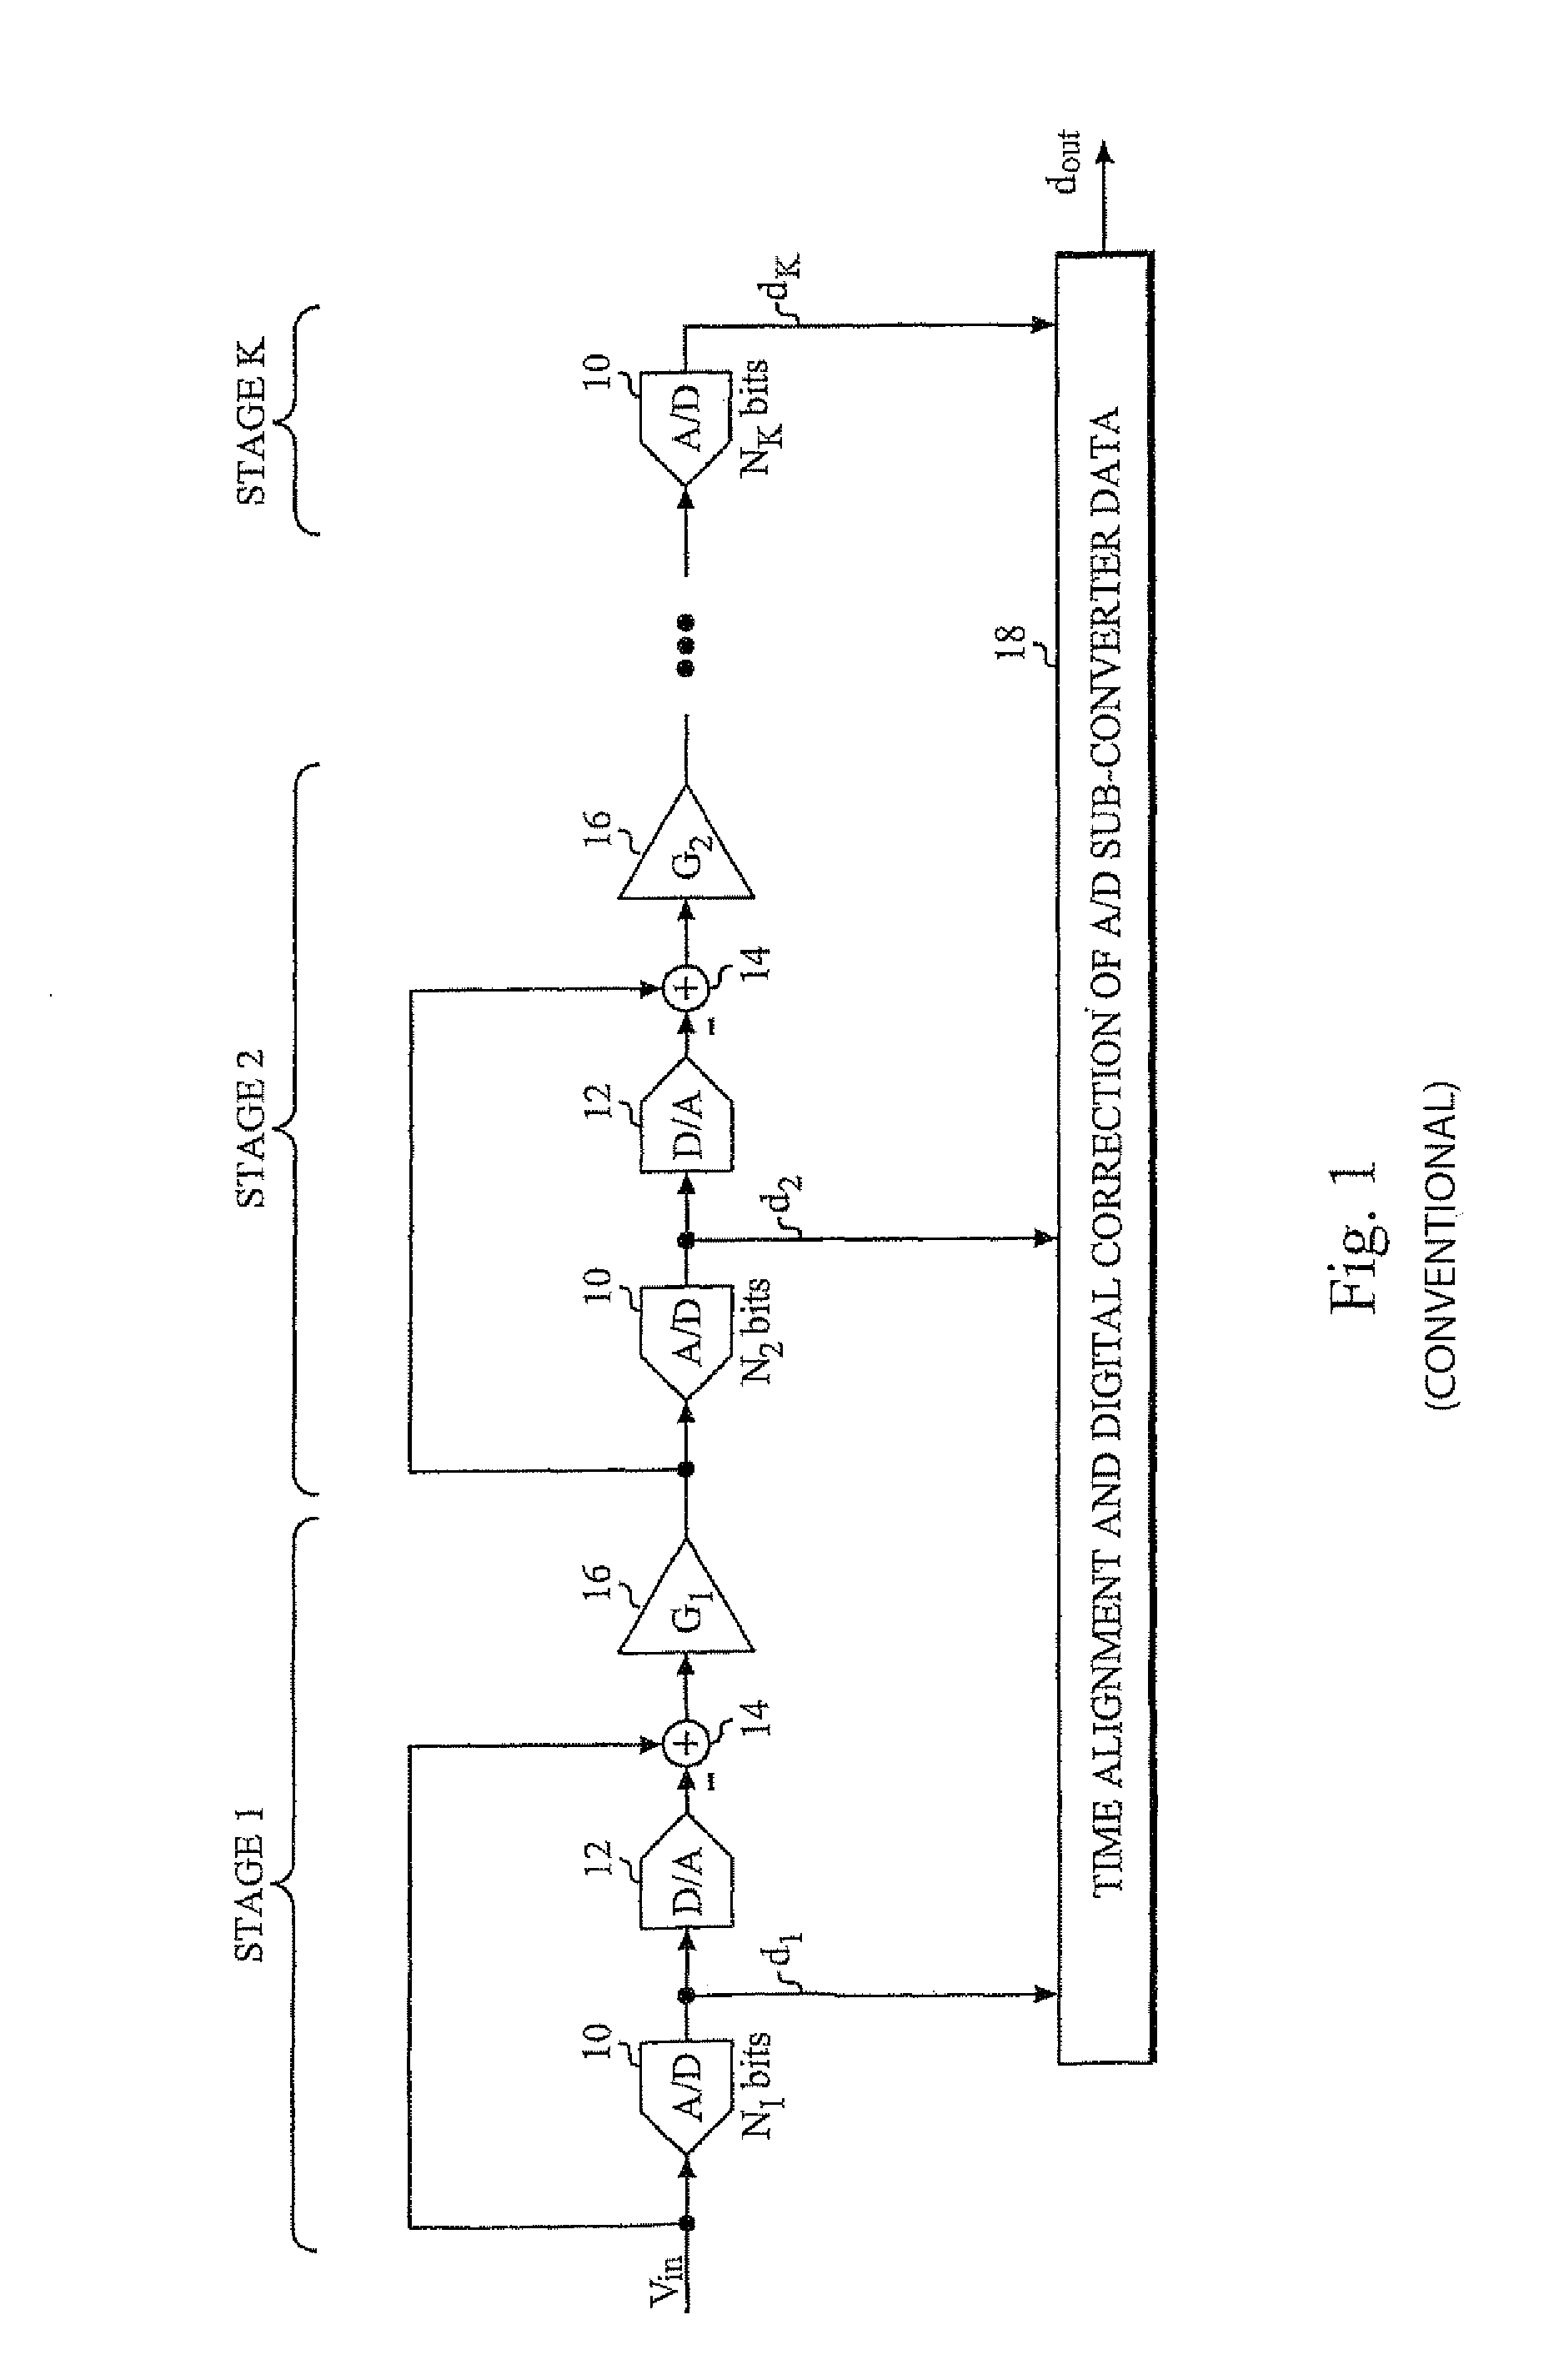 A/D converter calibration test sequence insertion